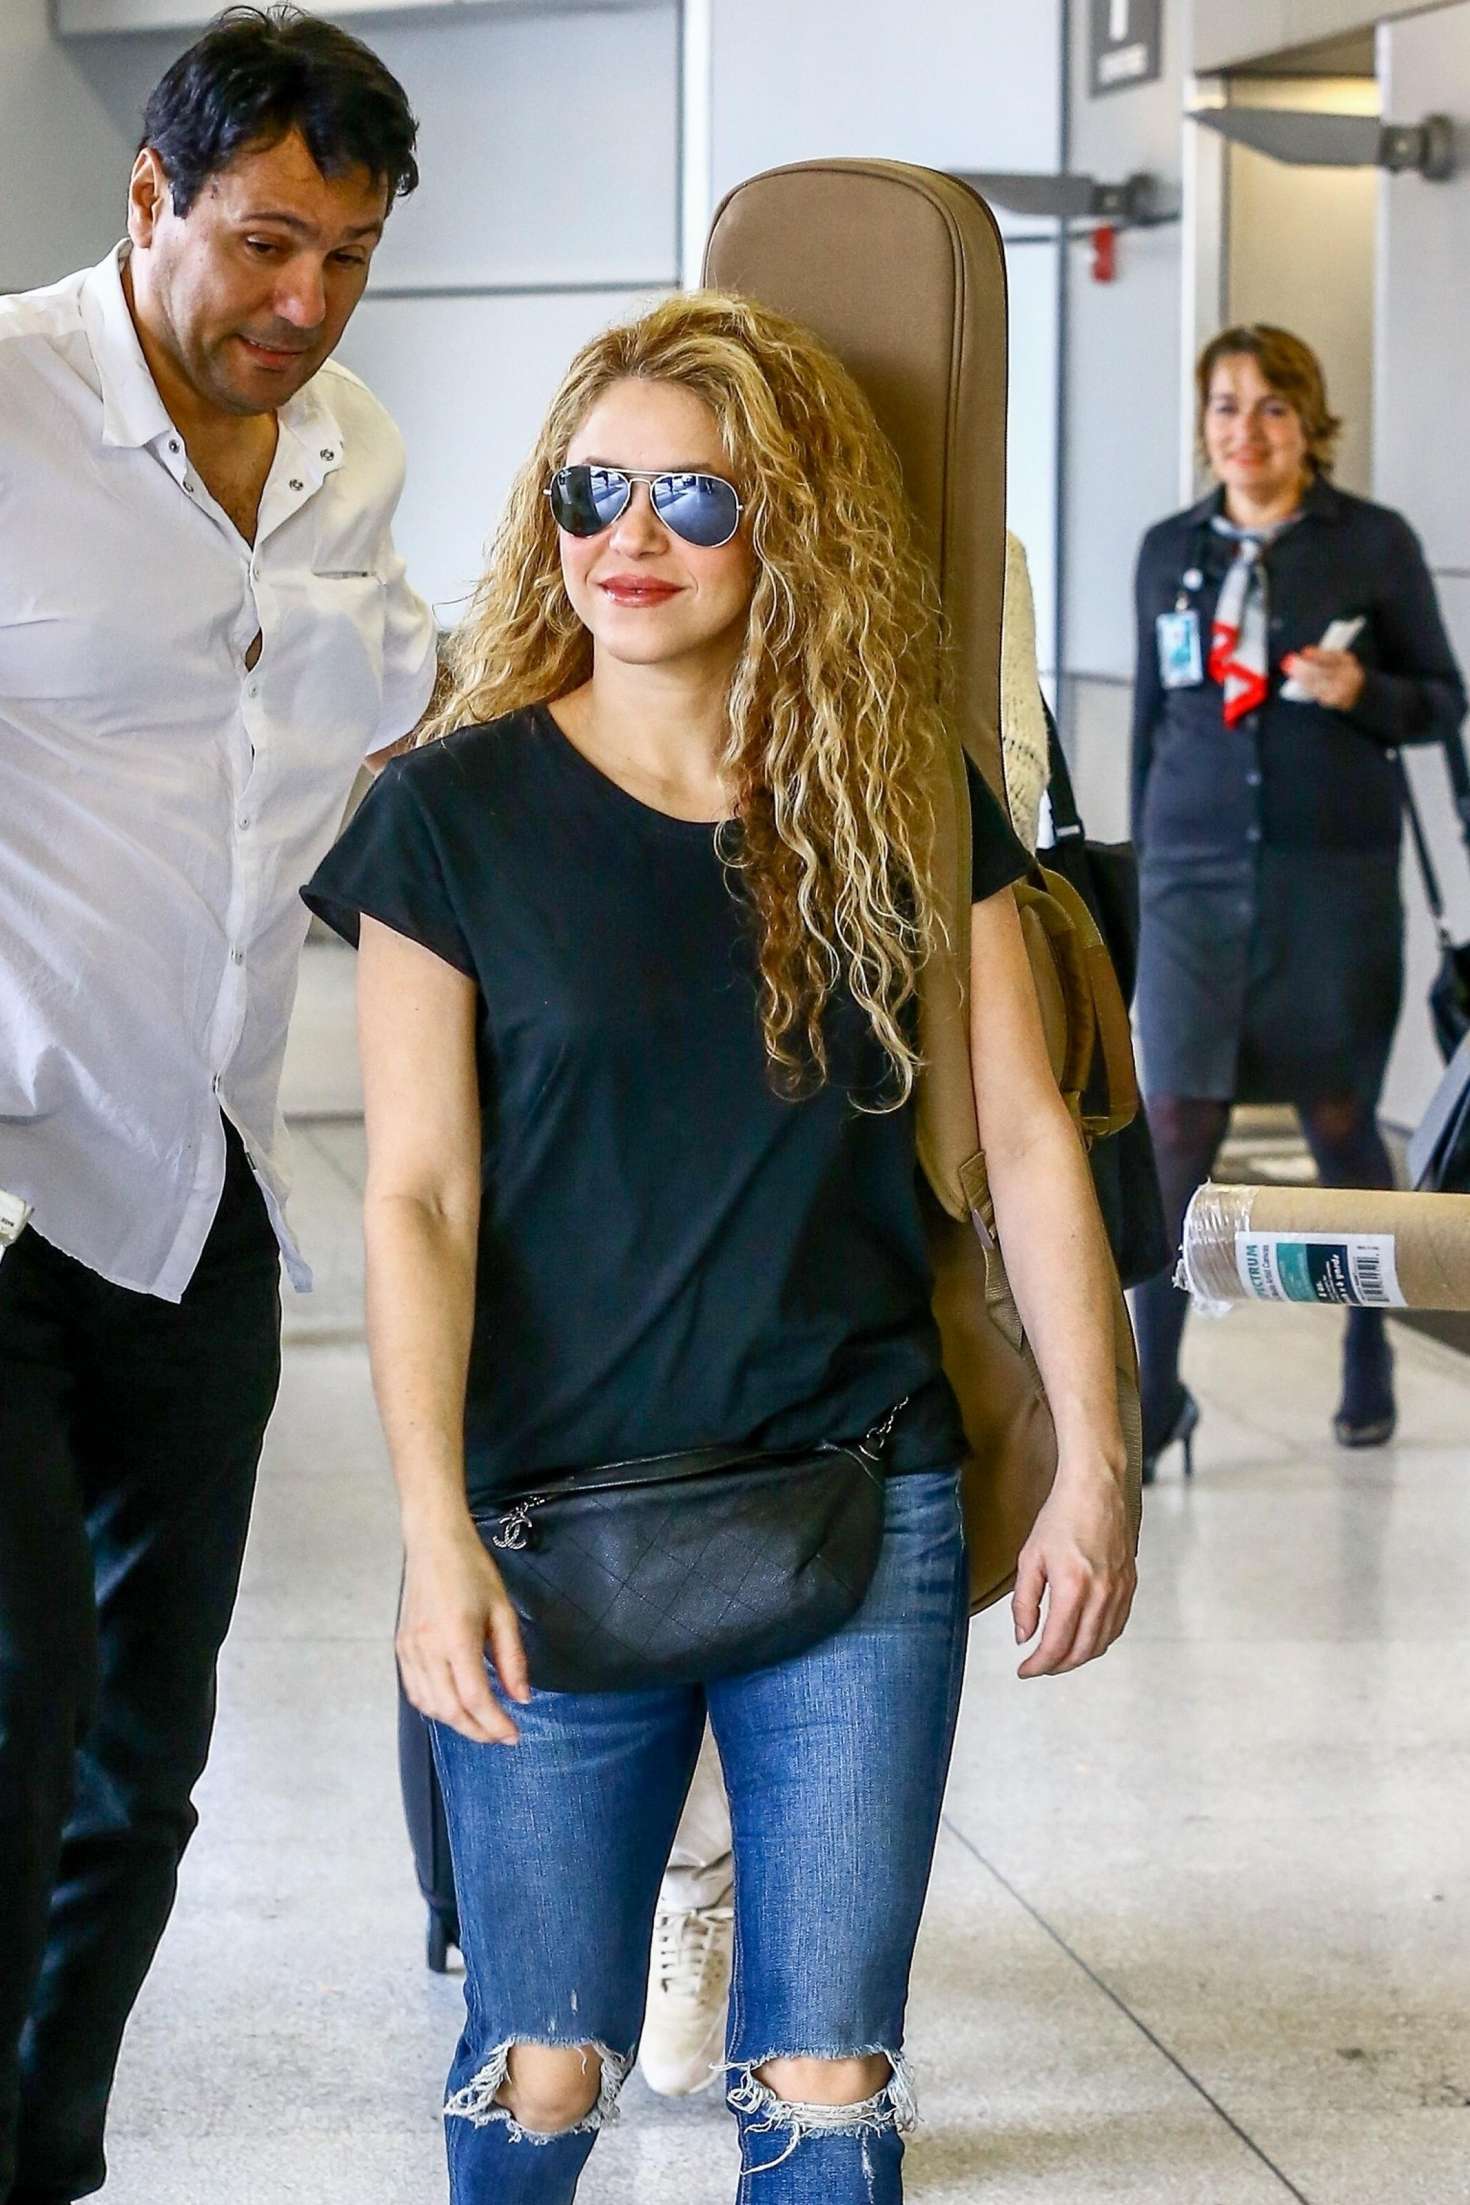 Shakira in Ripped Jeans at Airport in Miami -02 | GotCeleb